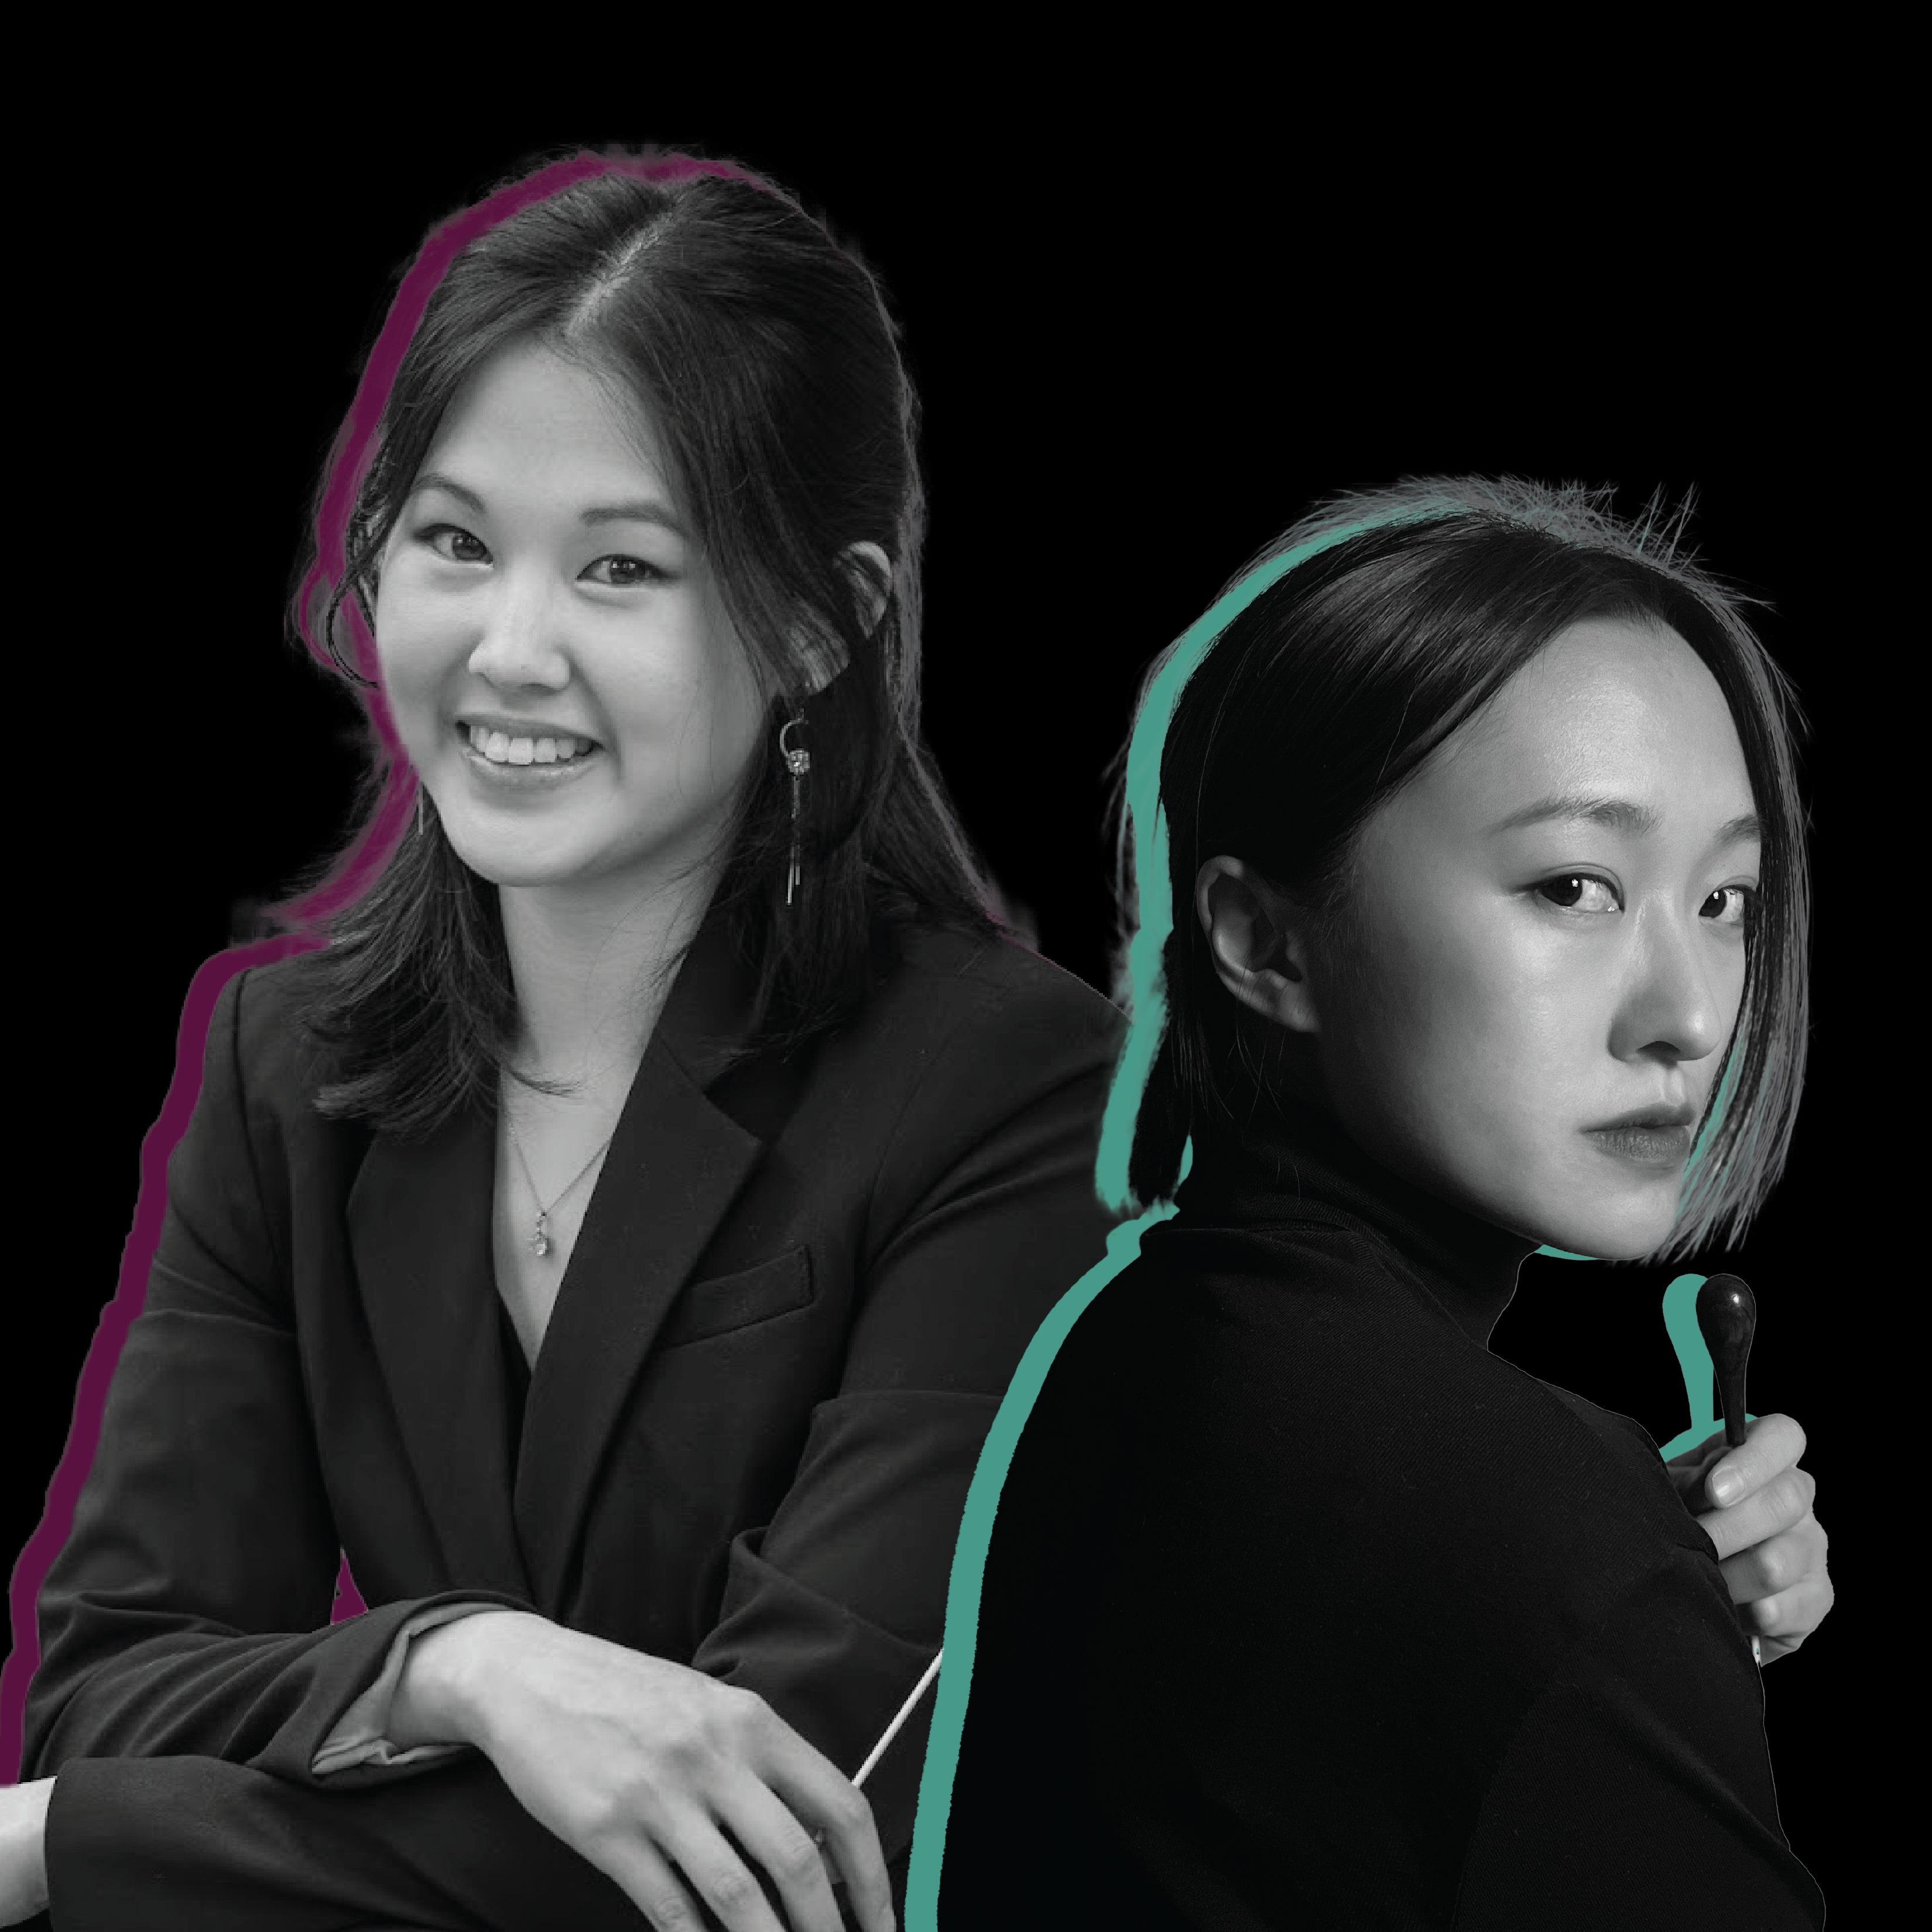 stylized headshots of Monica Chen and Kelly Lin. Black and white images on a black background